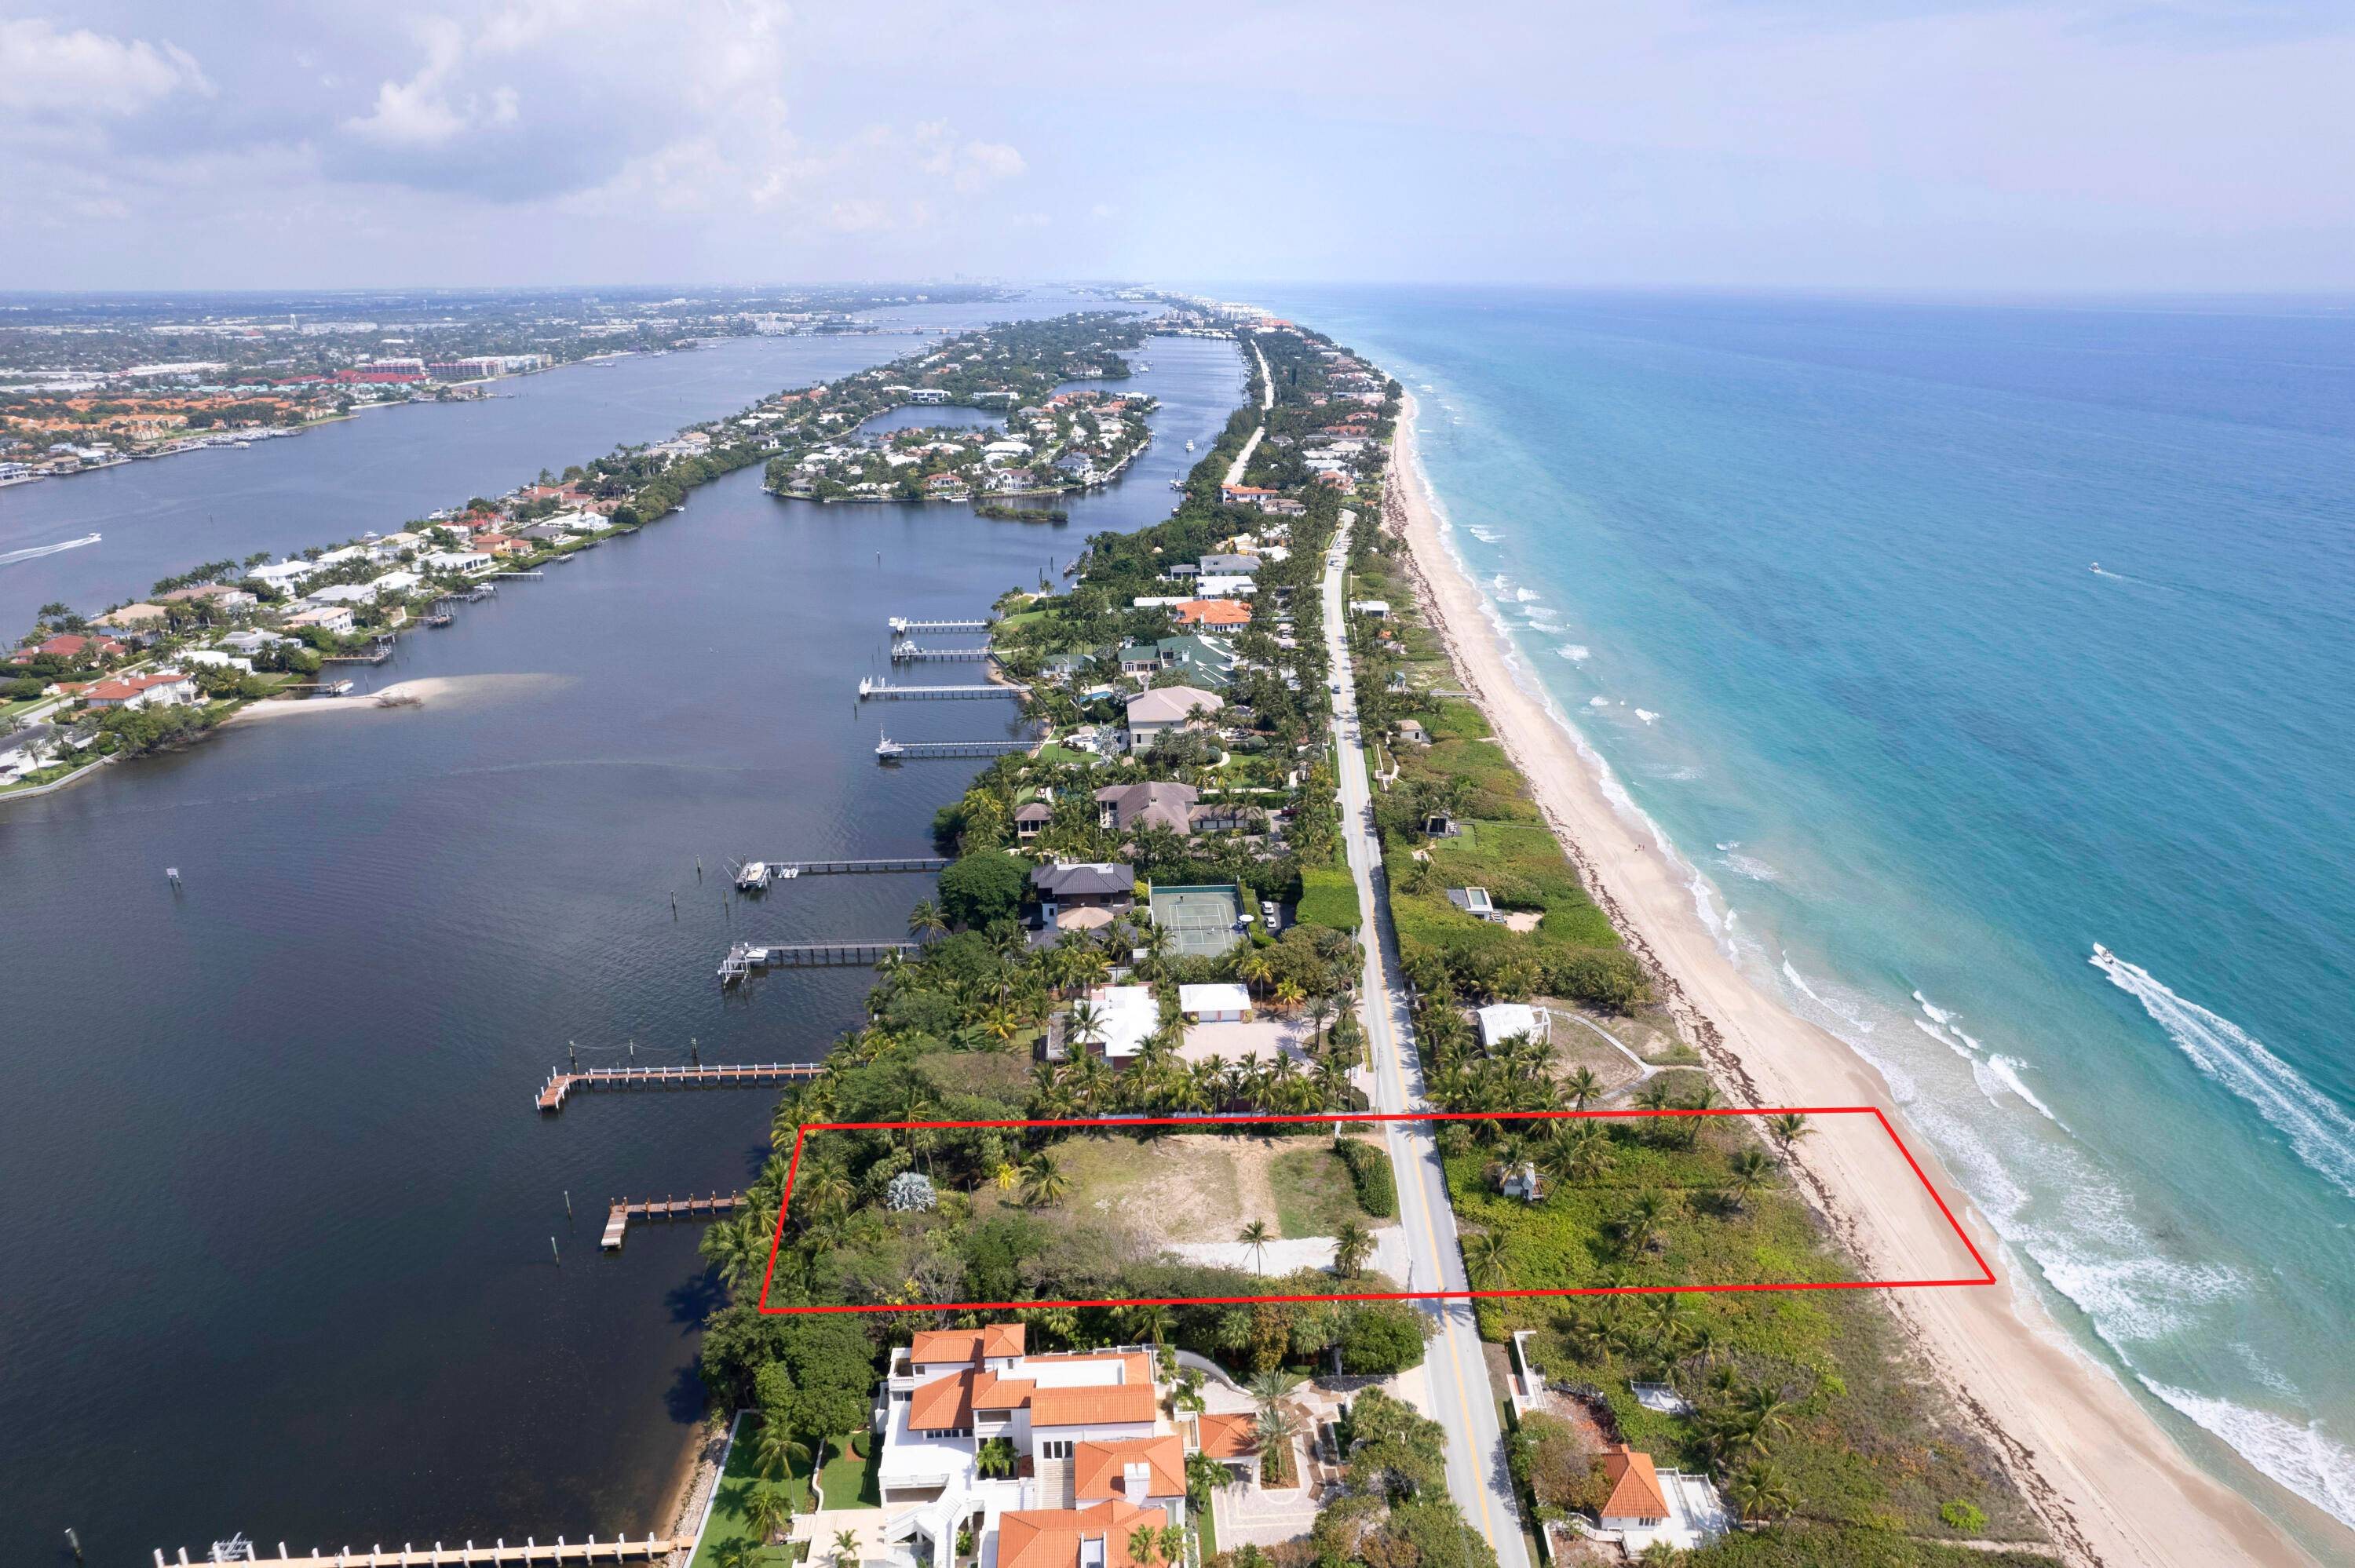 Welcome to 1820 S. Ocean Blvd, Manalapan, Florida an exceptional piece of vacant land that promises a truly unparalleled living experience.